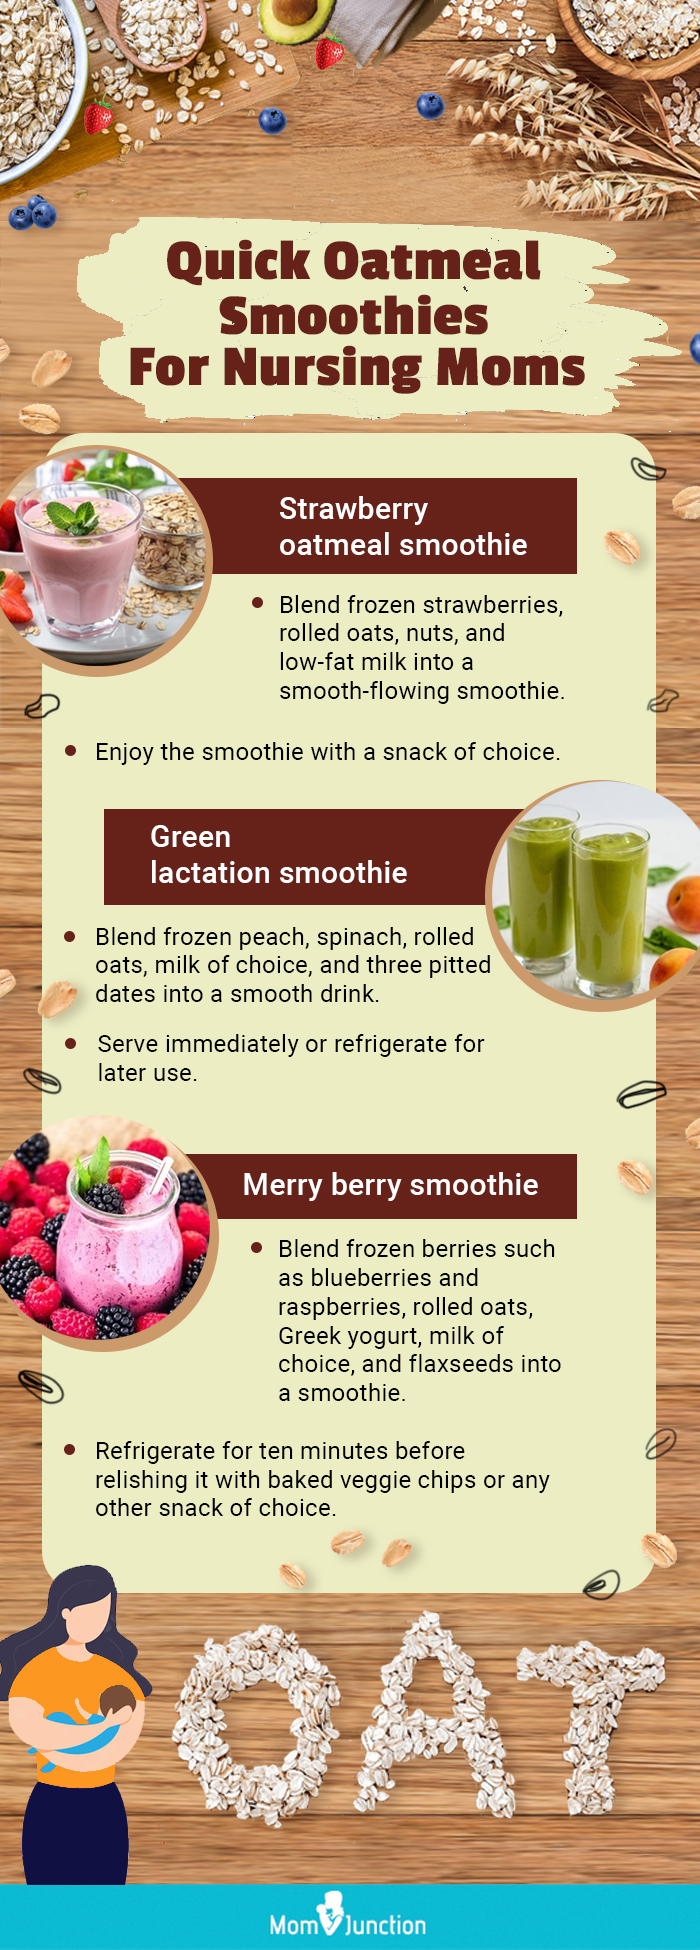 quick oatmeal smoothies for nursing moms (infographic)